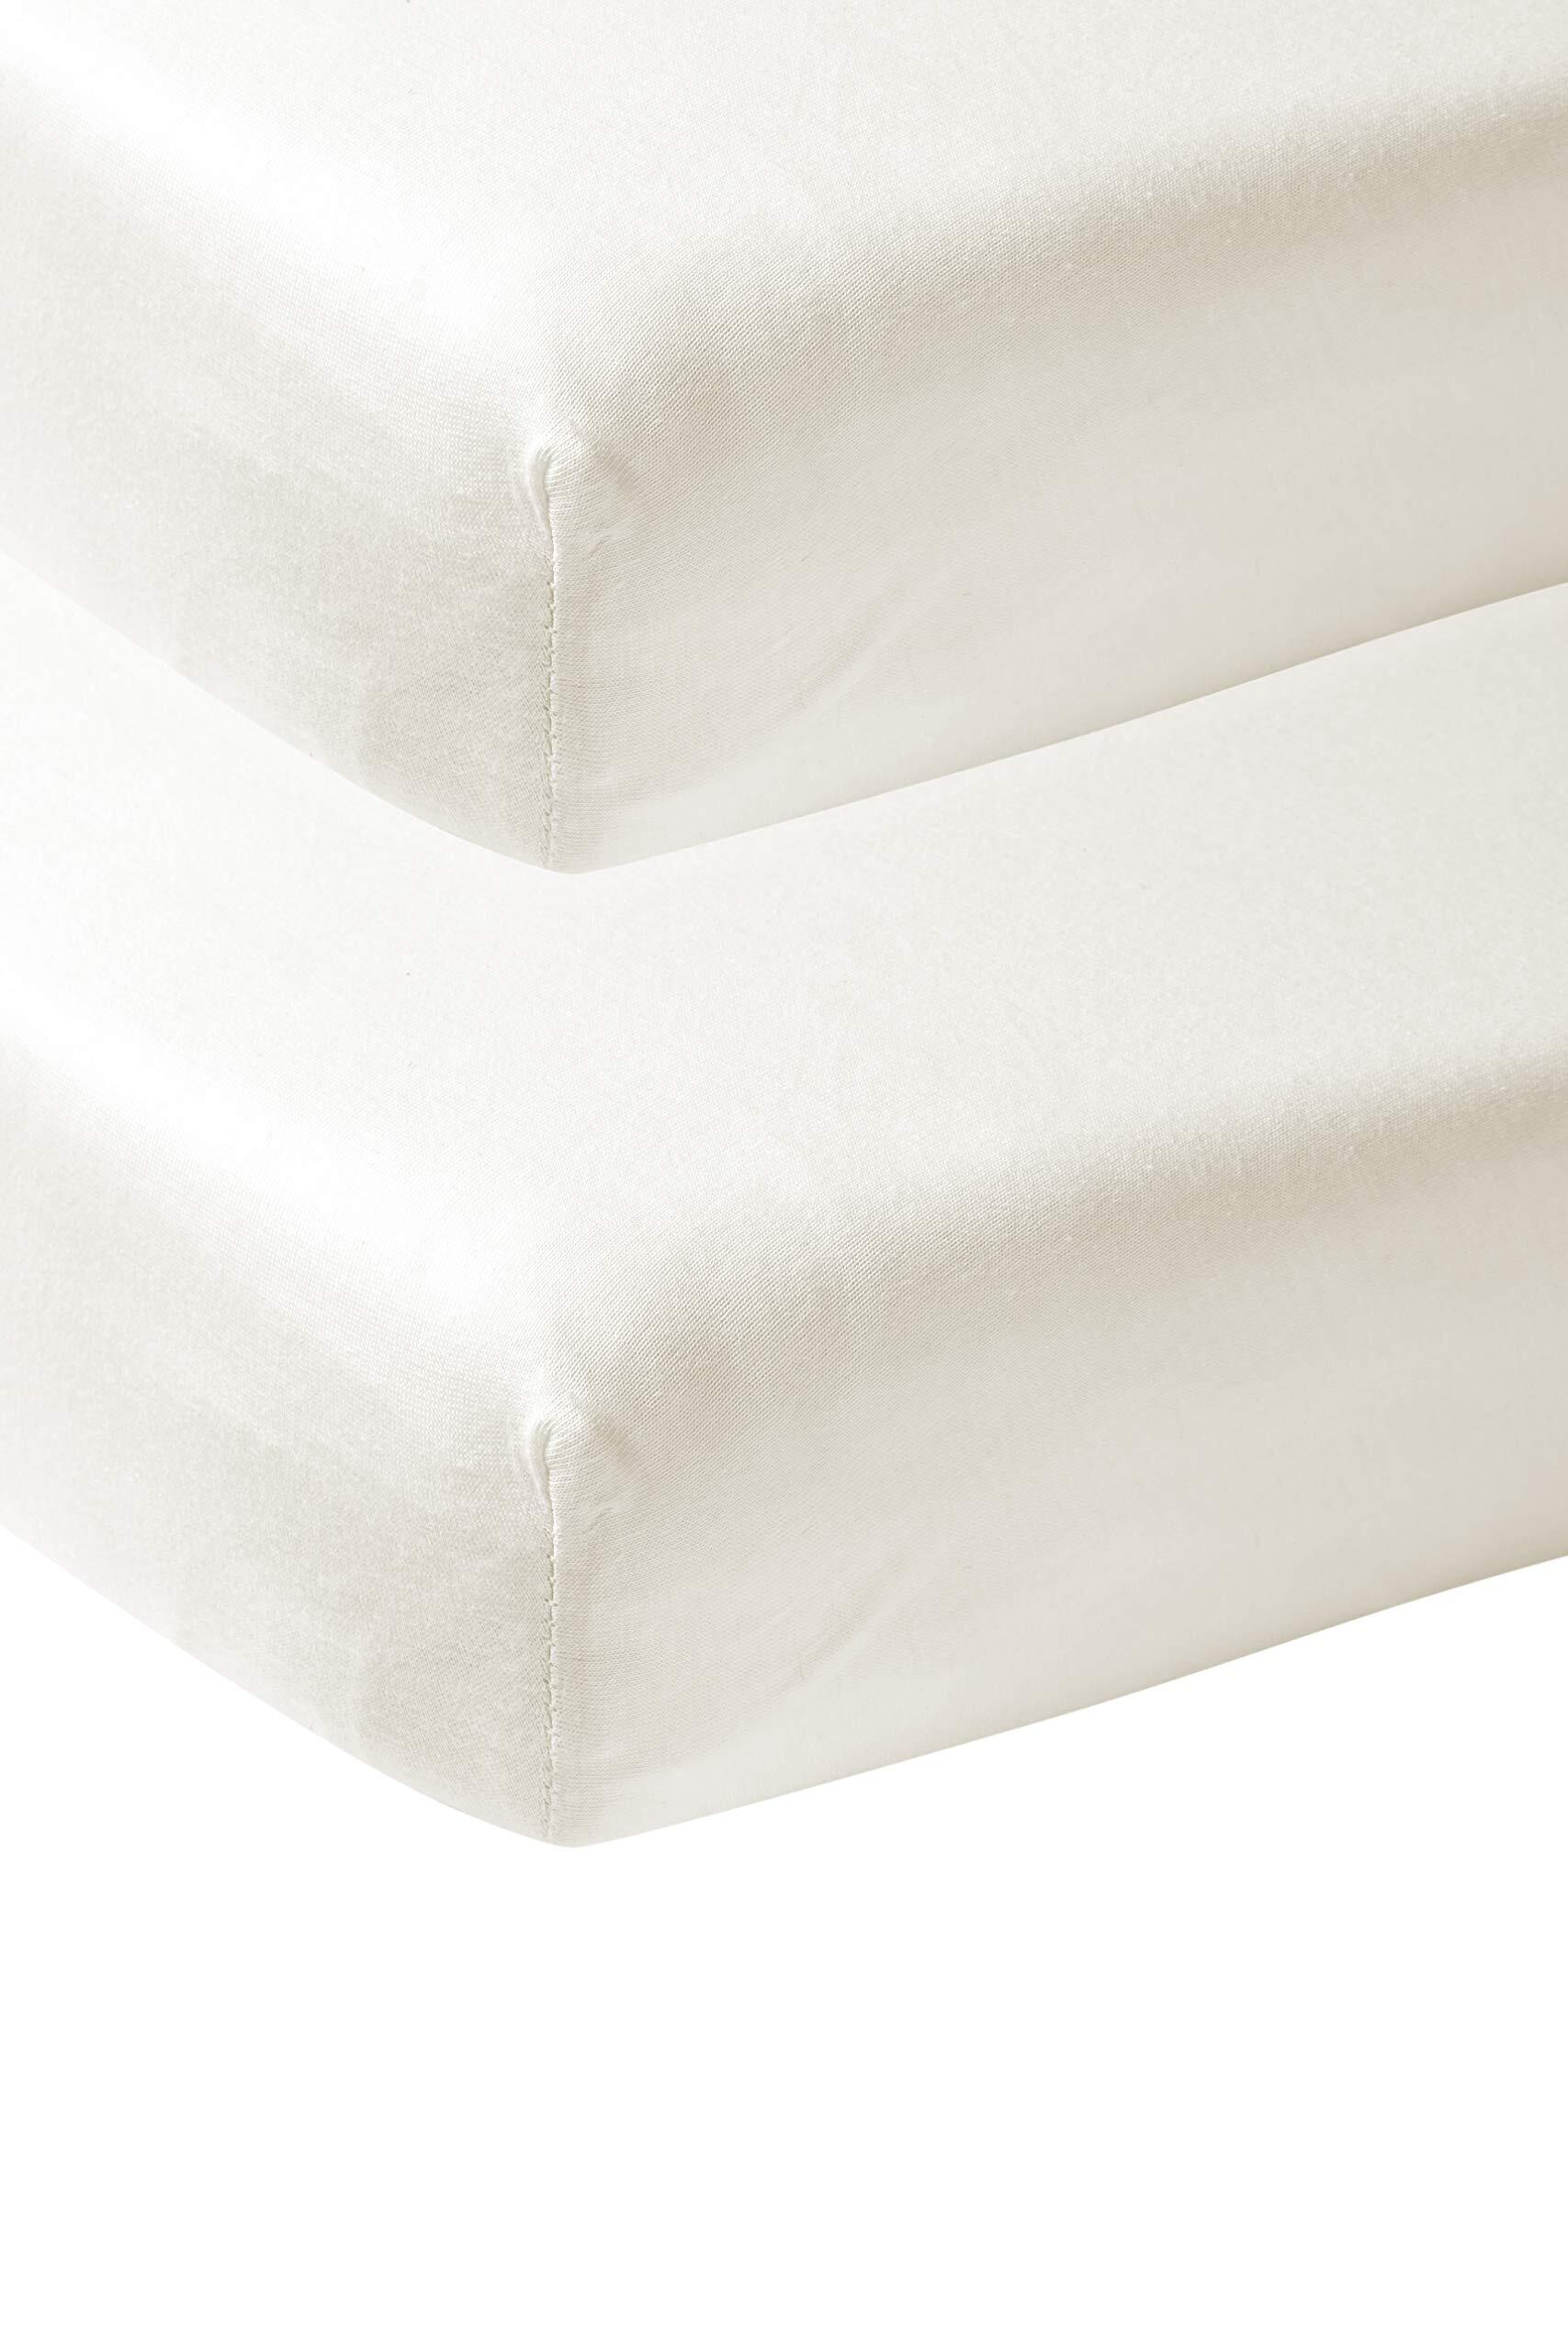 Meyco jersey hoeslaken 2-pack - 70x140/150 - offwhite